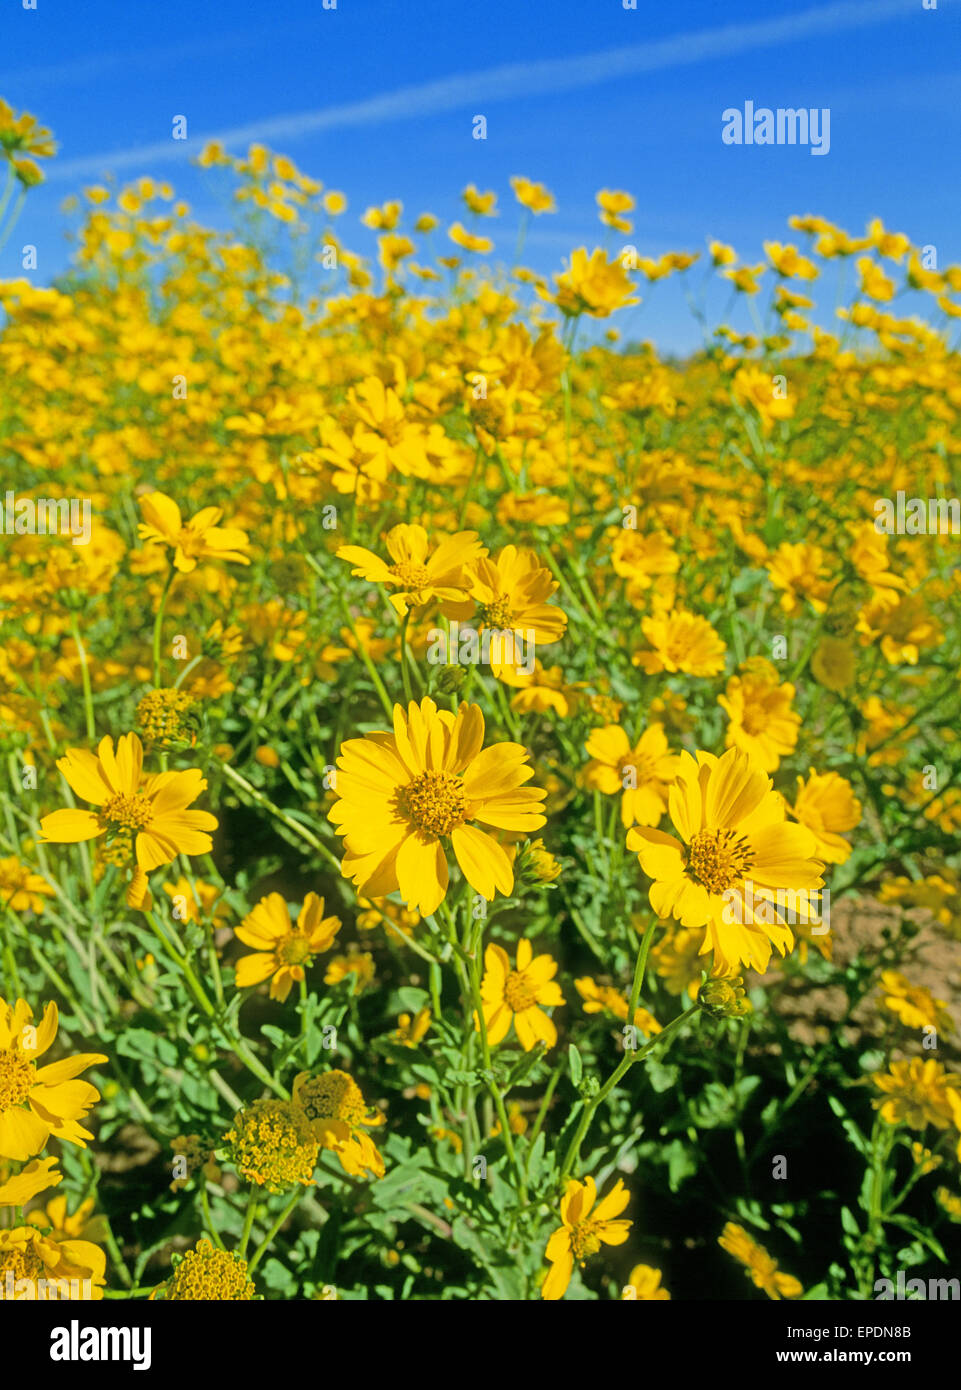 A field of camphorweed, or false goldenaster, Heterotheca subaxillaris, growing along side the highway near the town of Chama, New Mexico Stock Photo